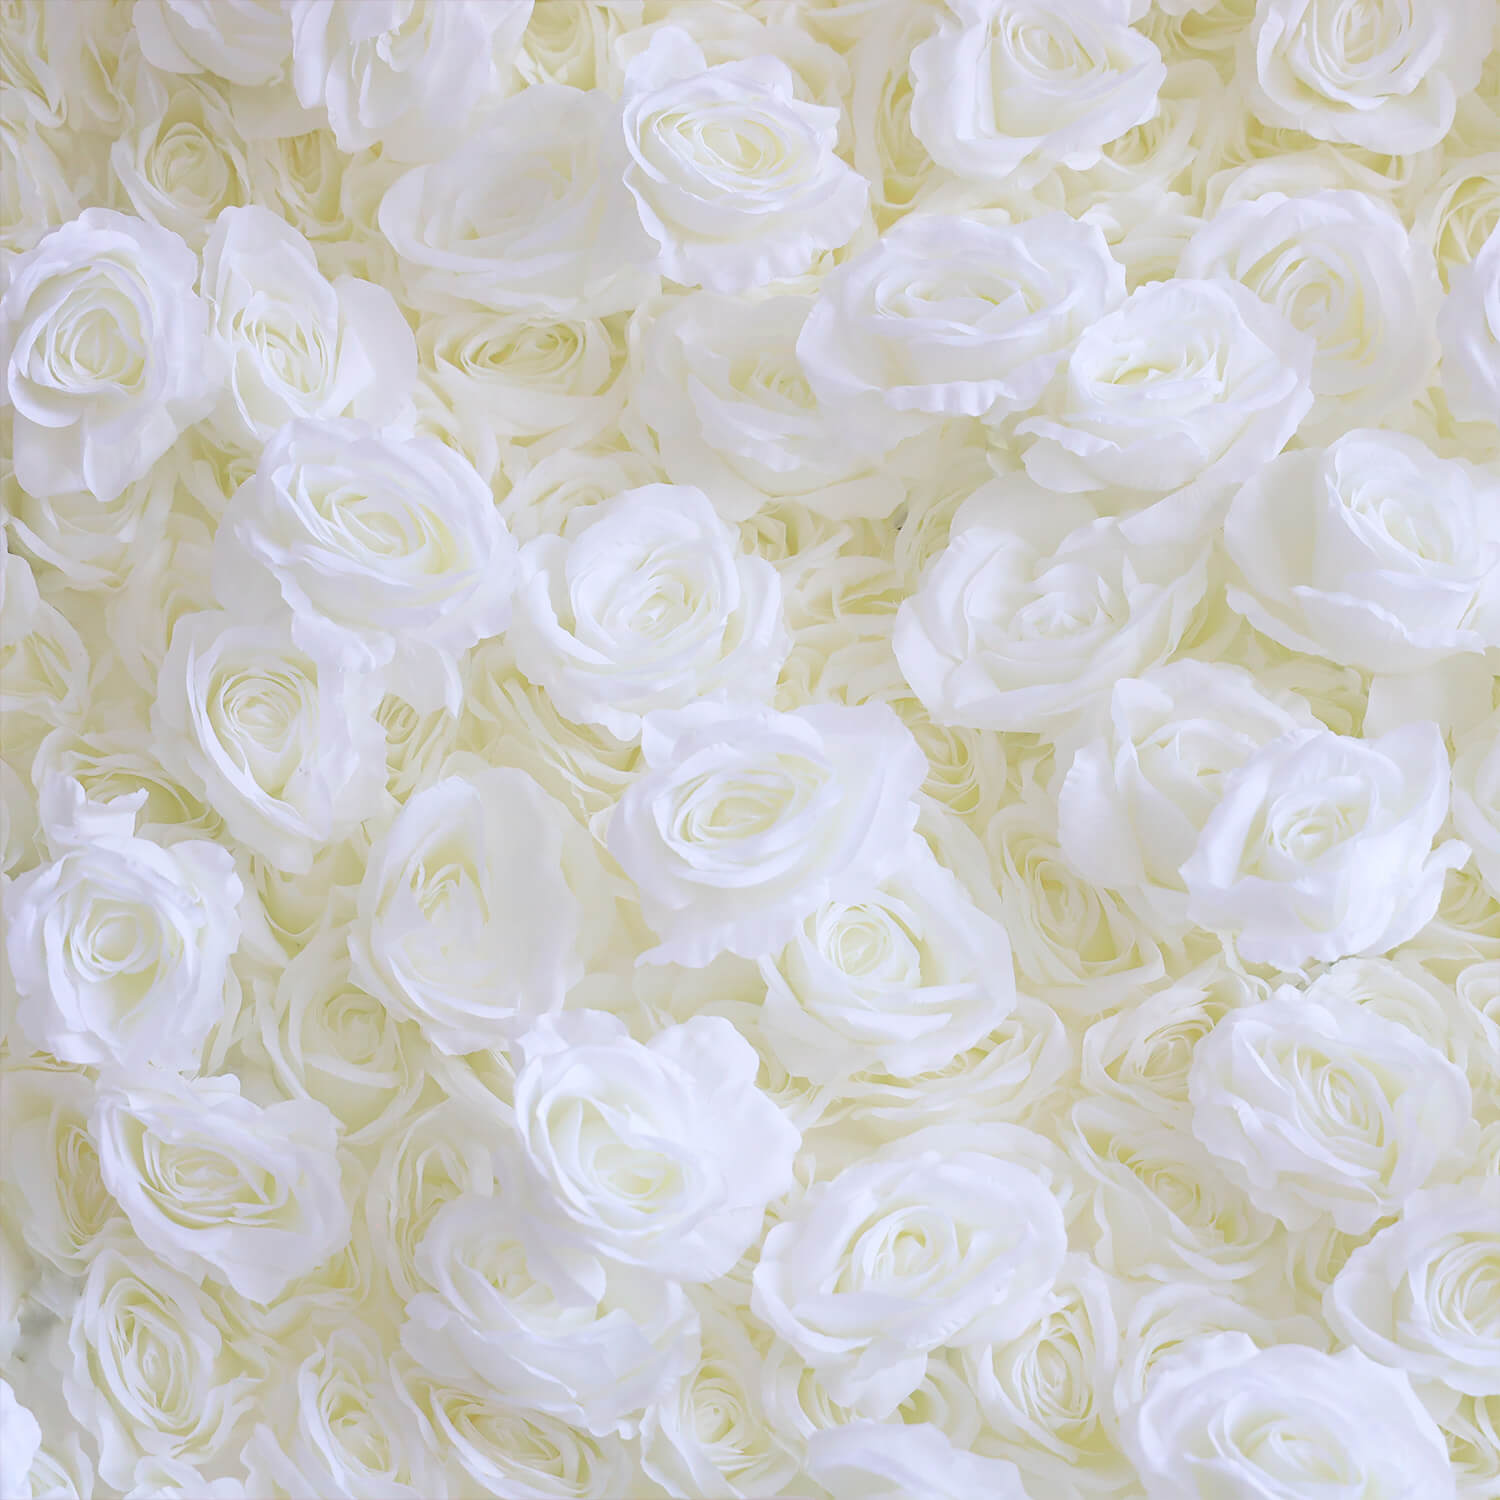 Full White Roses Fabric Artificial Flower Wall For Wedding Arrangement Event-ubackdrop